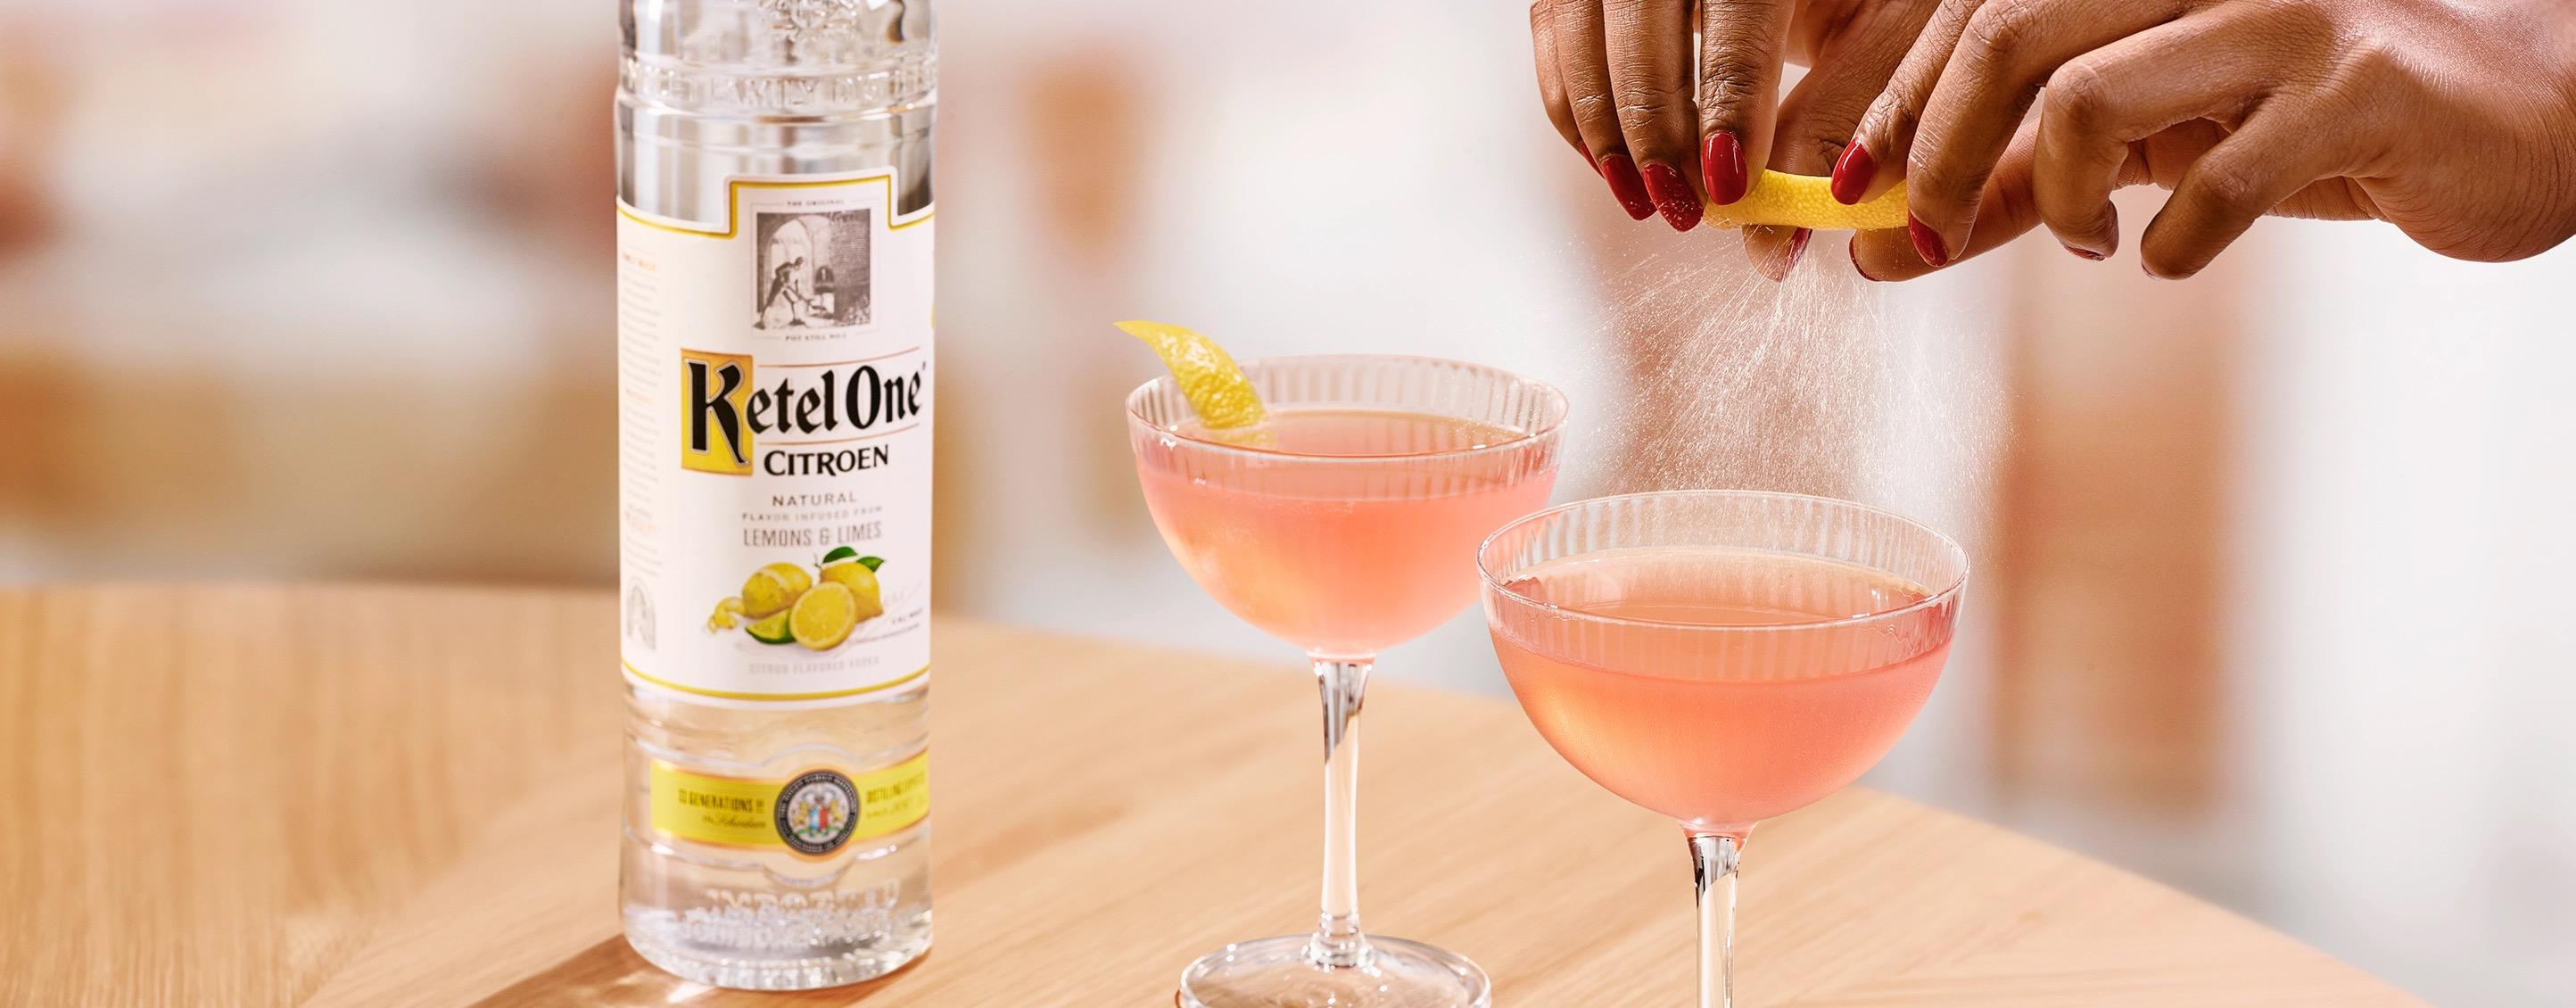 Ketel One Cosmo in Coupe Glass with hand adding lemon spritz